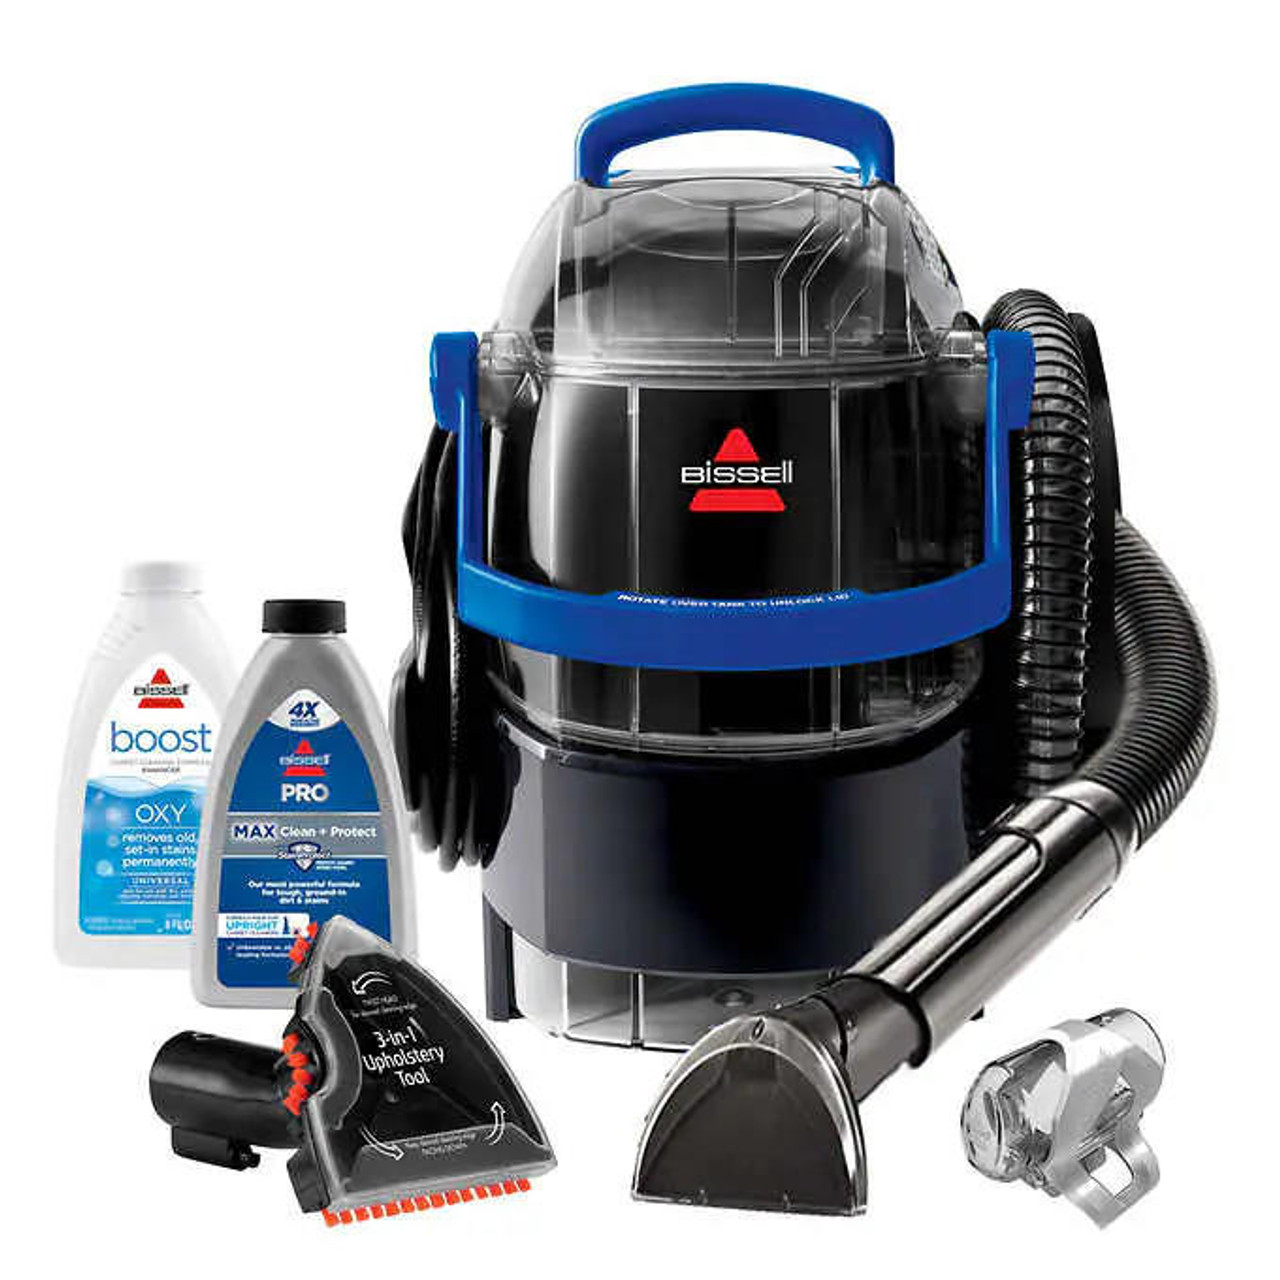 Bissell Spot Clean Professional Portable Carpet and Upholstery Cleaner - Powerful Stain Removal and Easy Cleaning
-Chicken Pieces